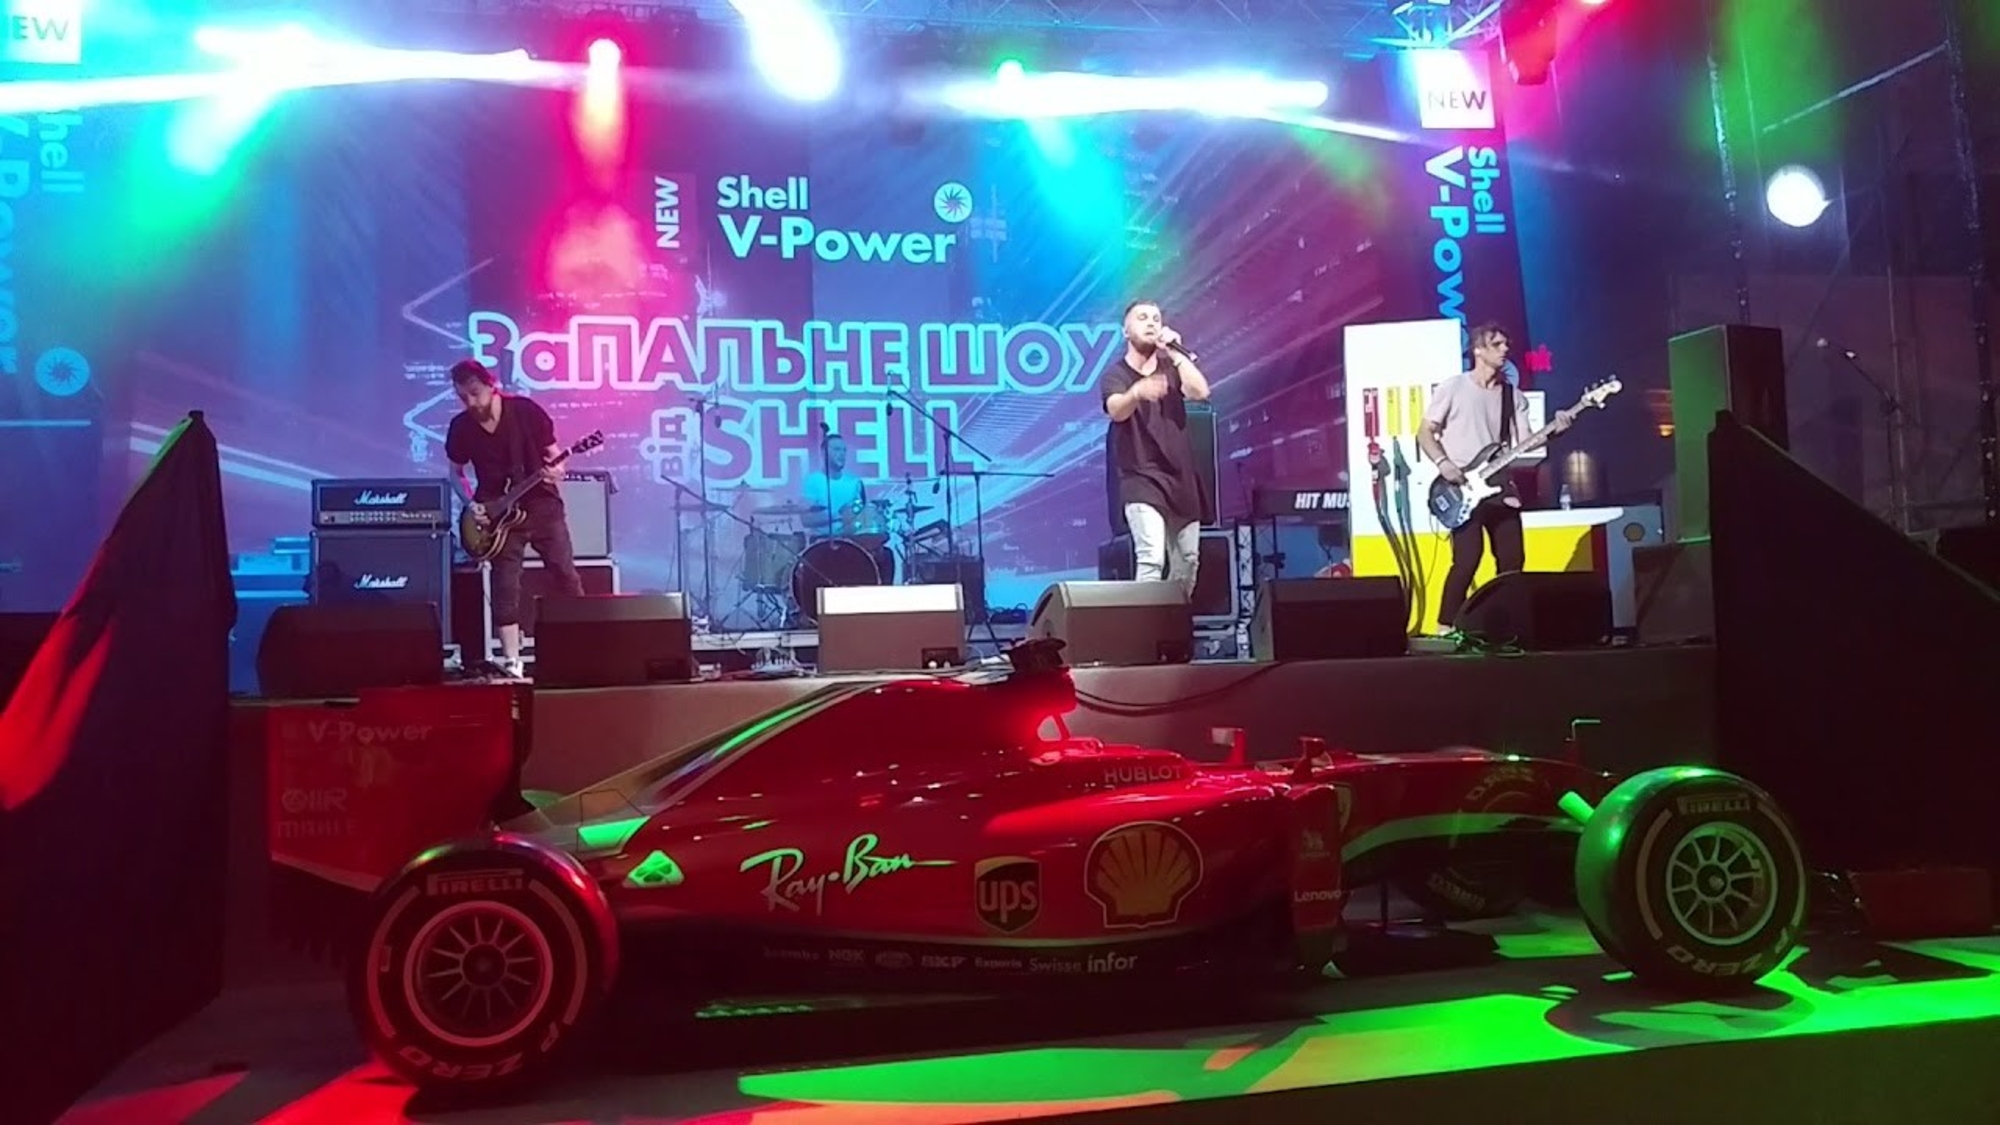 Shell V-Power Conference & Show - Photo